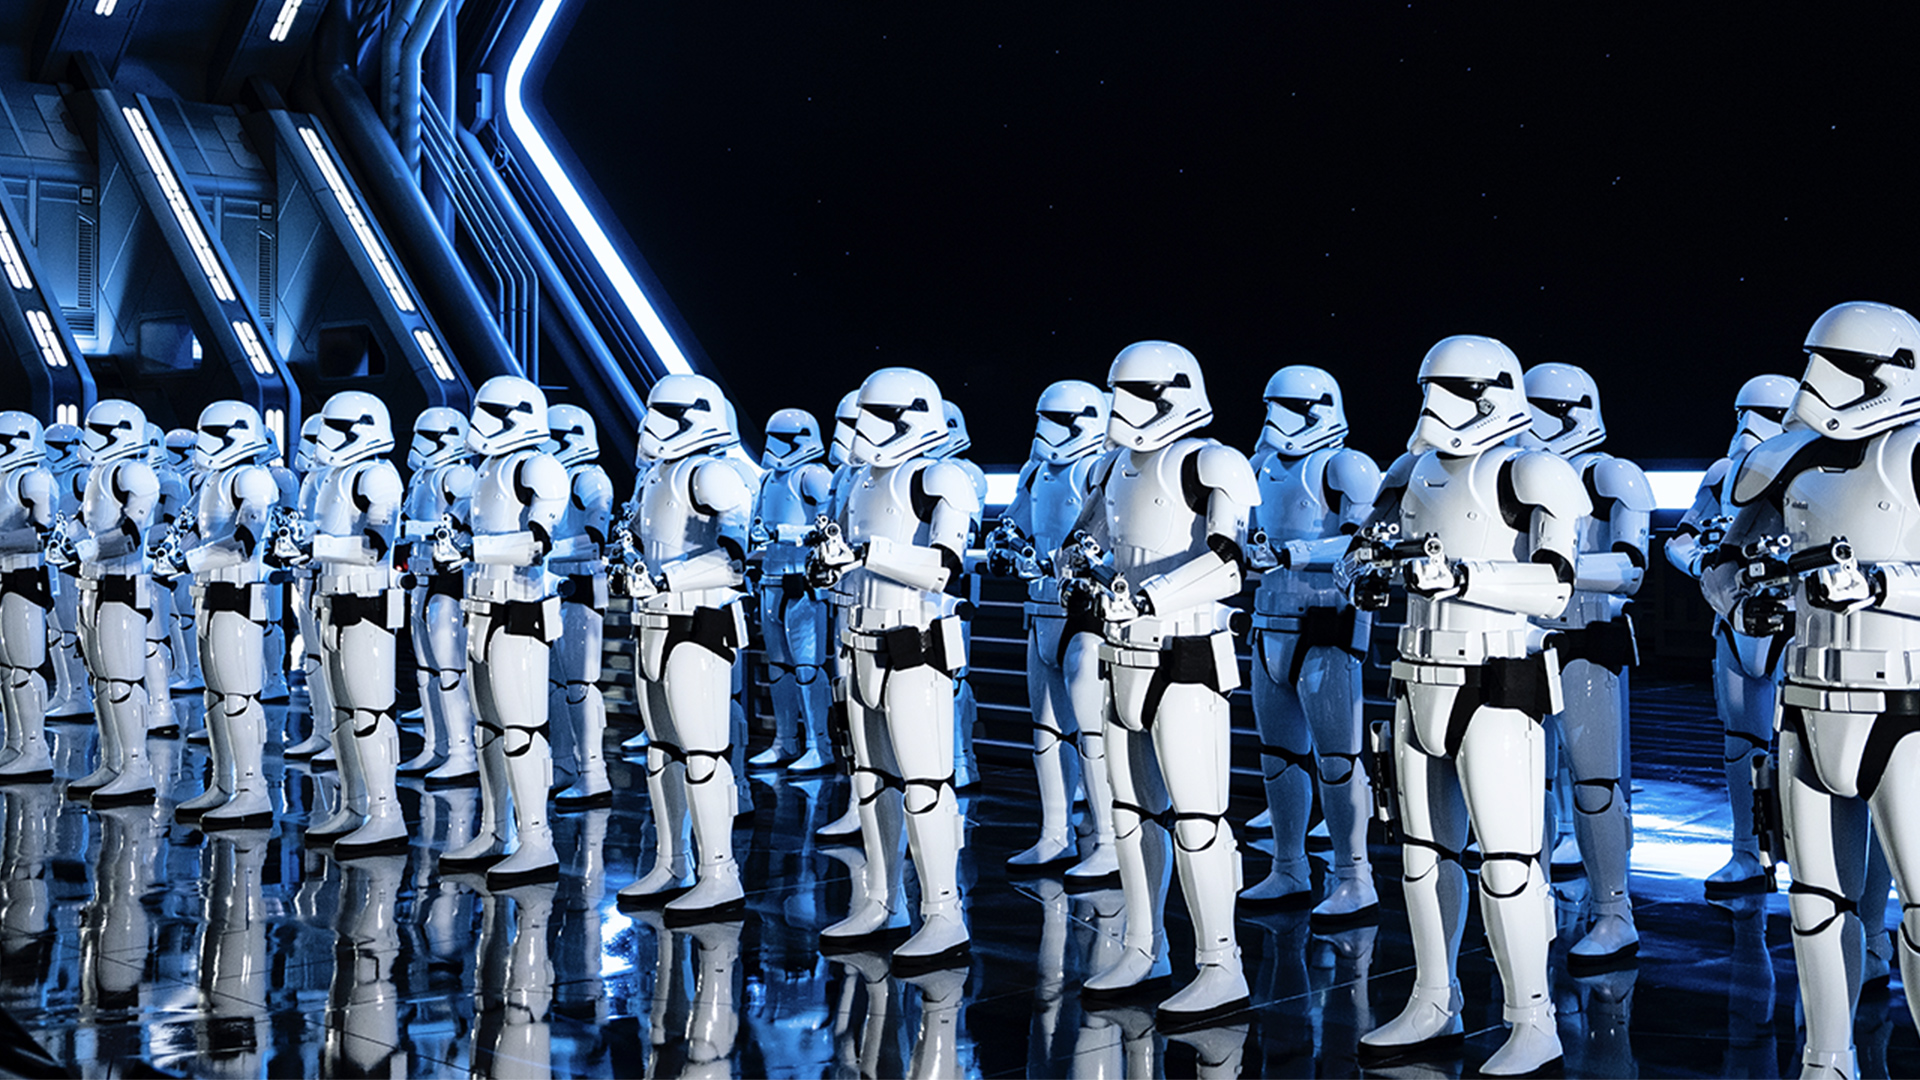 Star Wars Stormtroopers lined up